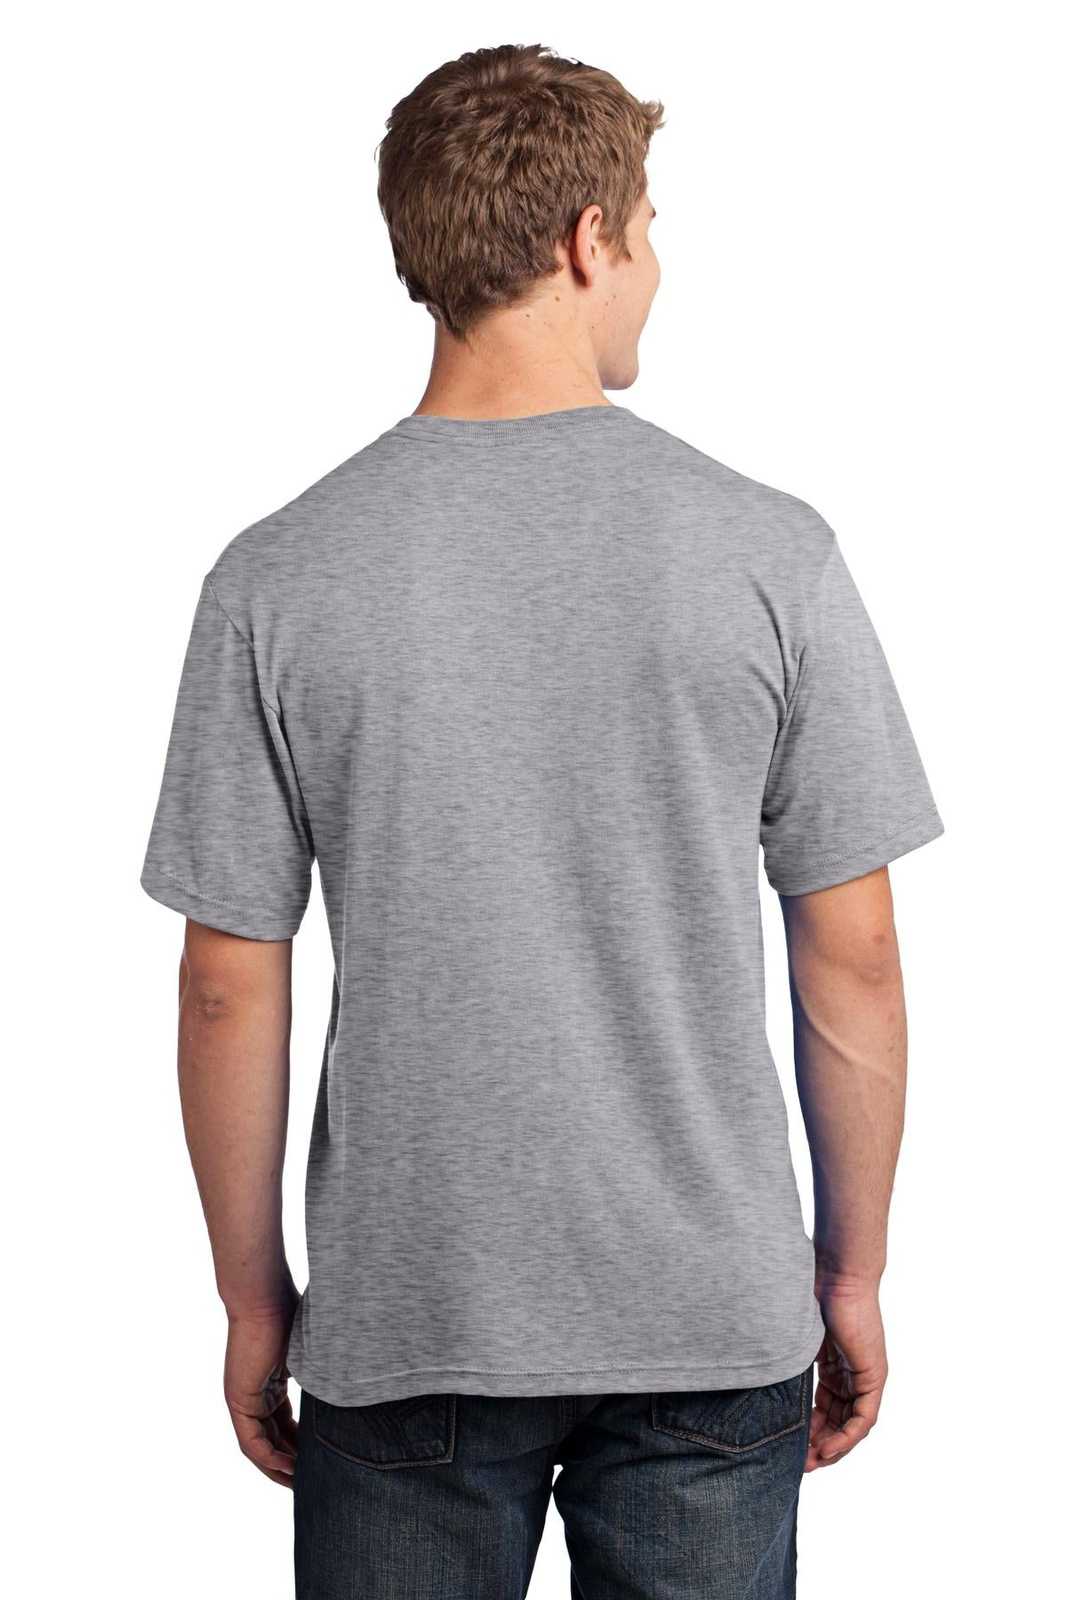 Port &amp; Company USA100P All-American Pocket Tee - Athletic Heather - HIT a Double - 2